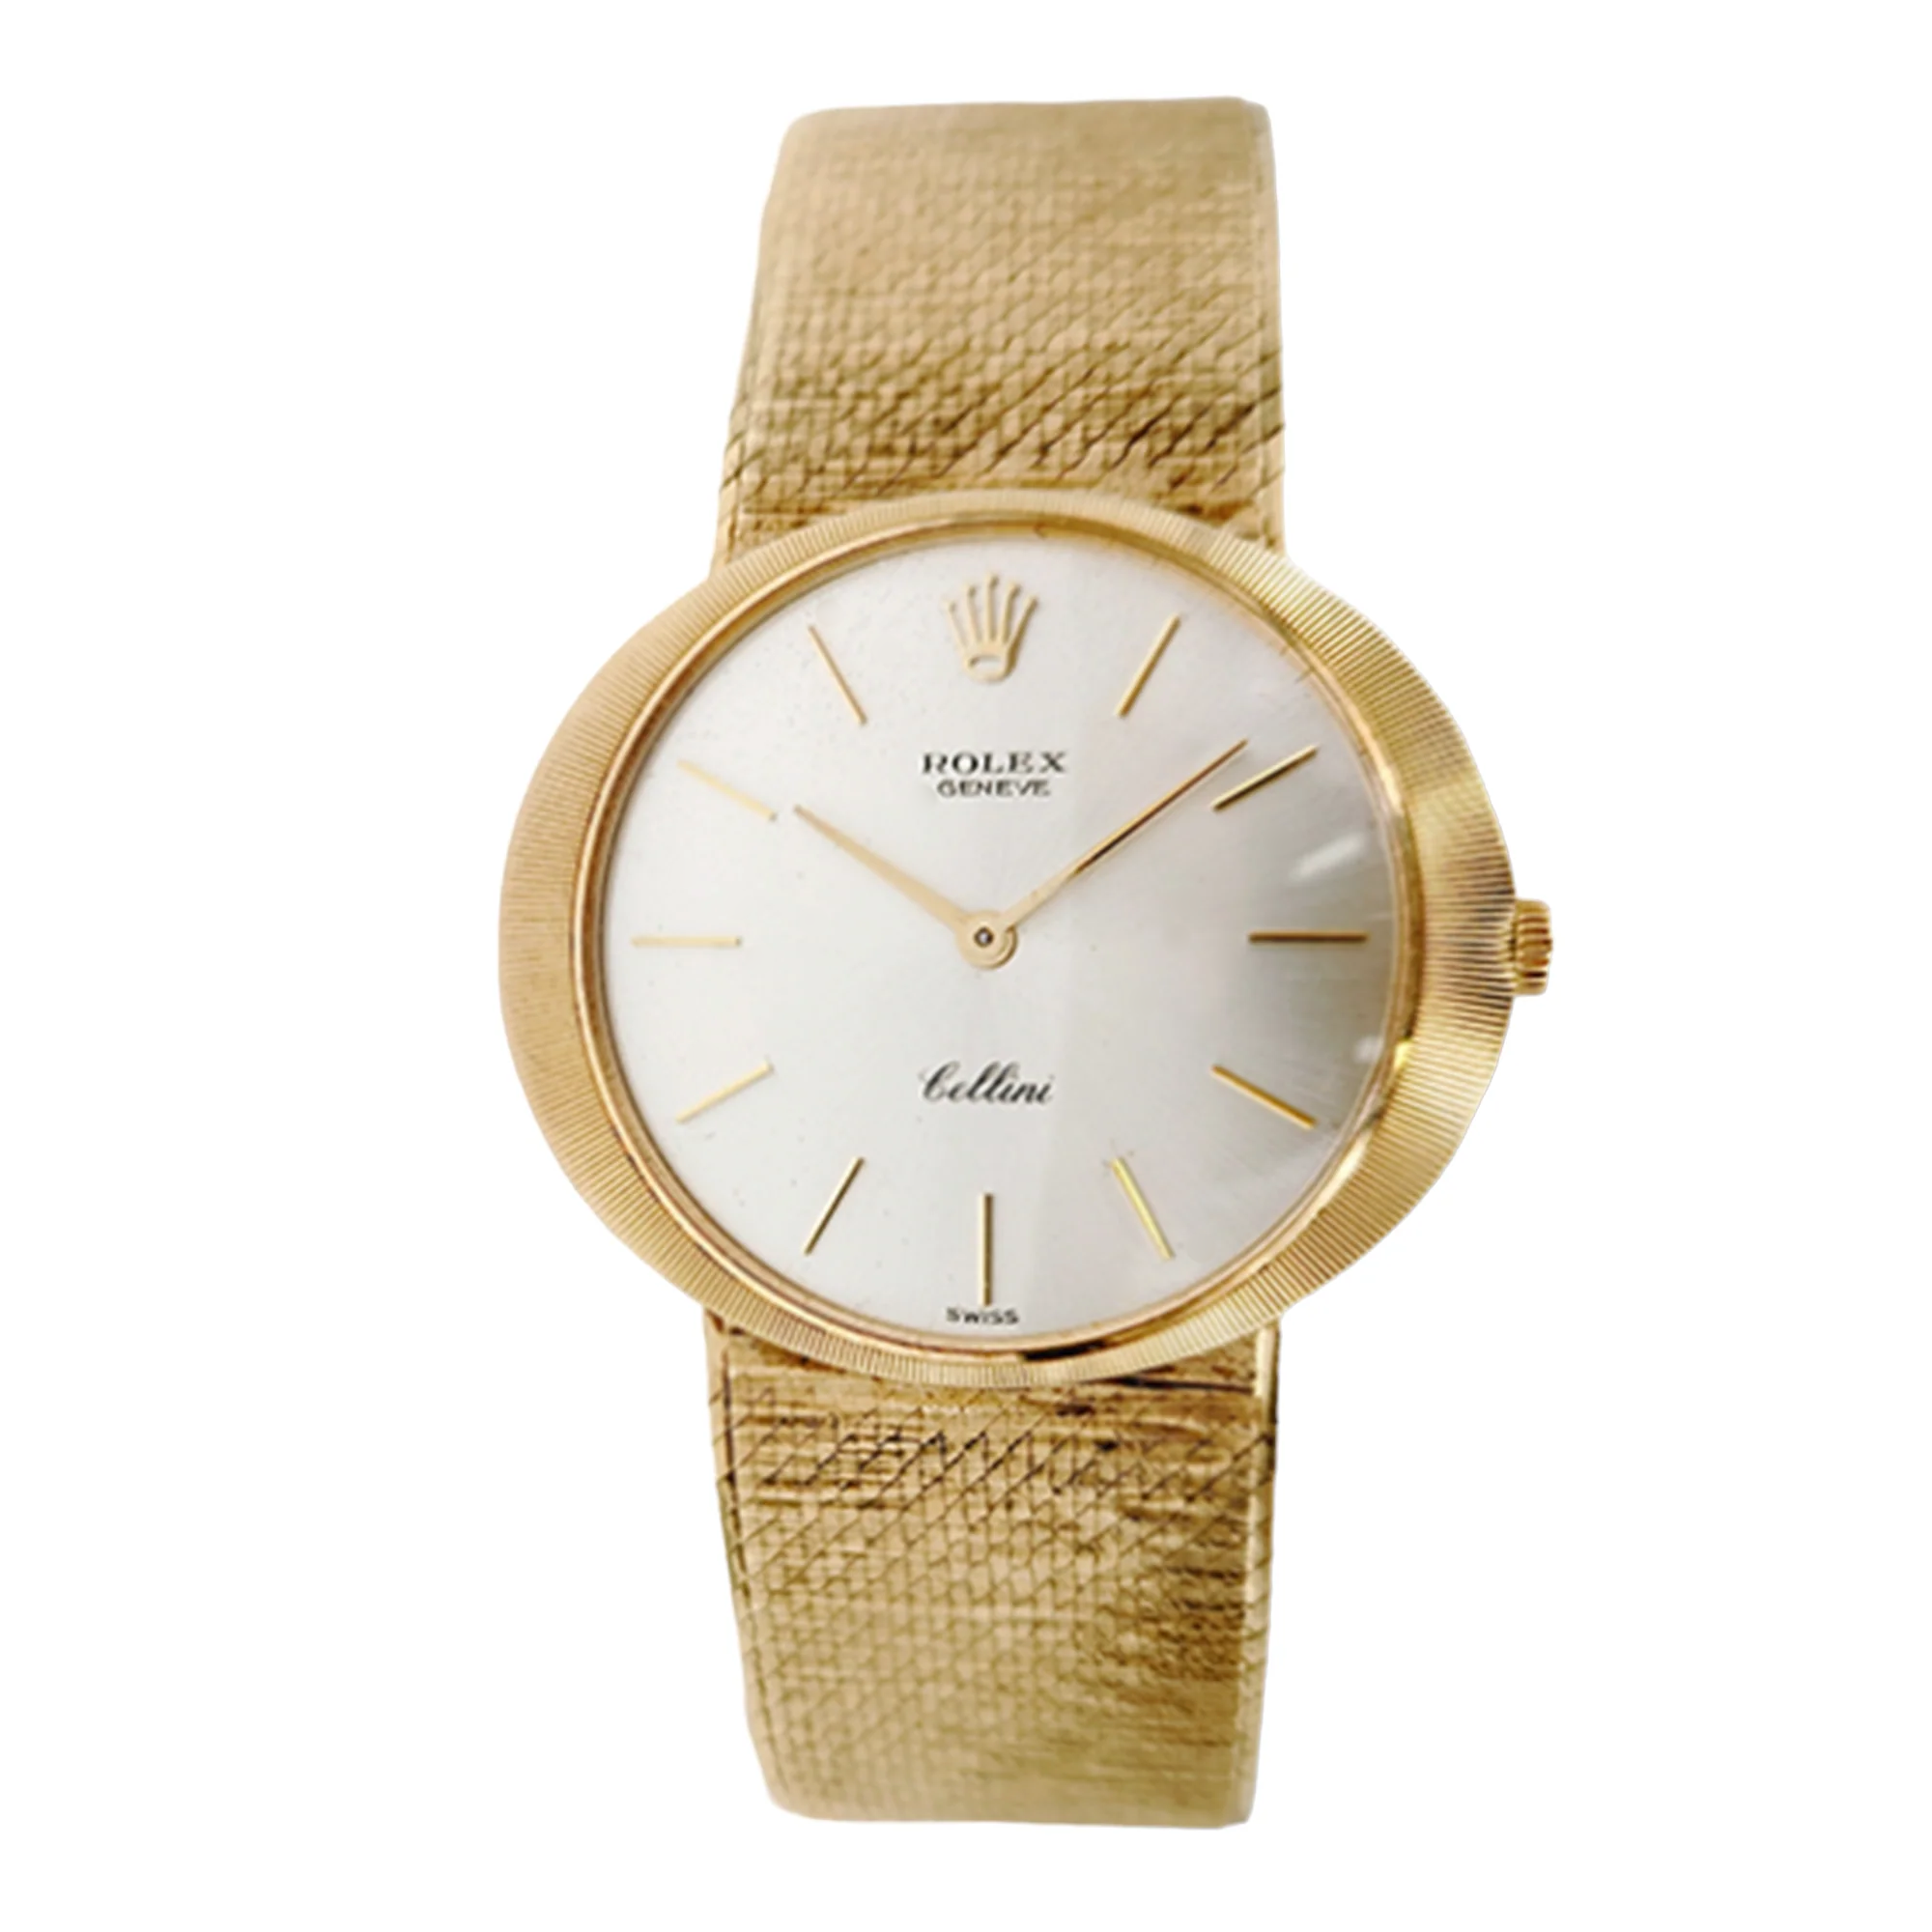 *Unisex Rolex Cellini Vintage 14K Yellow Gold Watch with Light Champagne Dial and Smooth Bezel. (Pre-Owned)